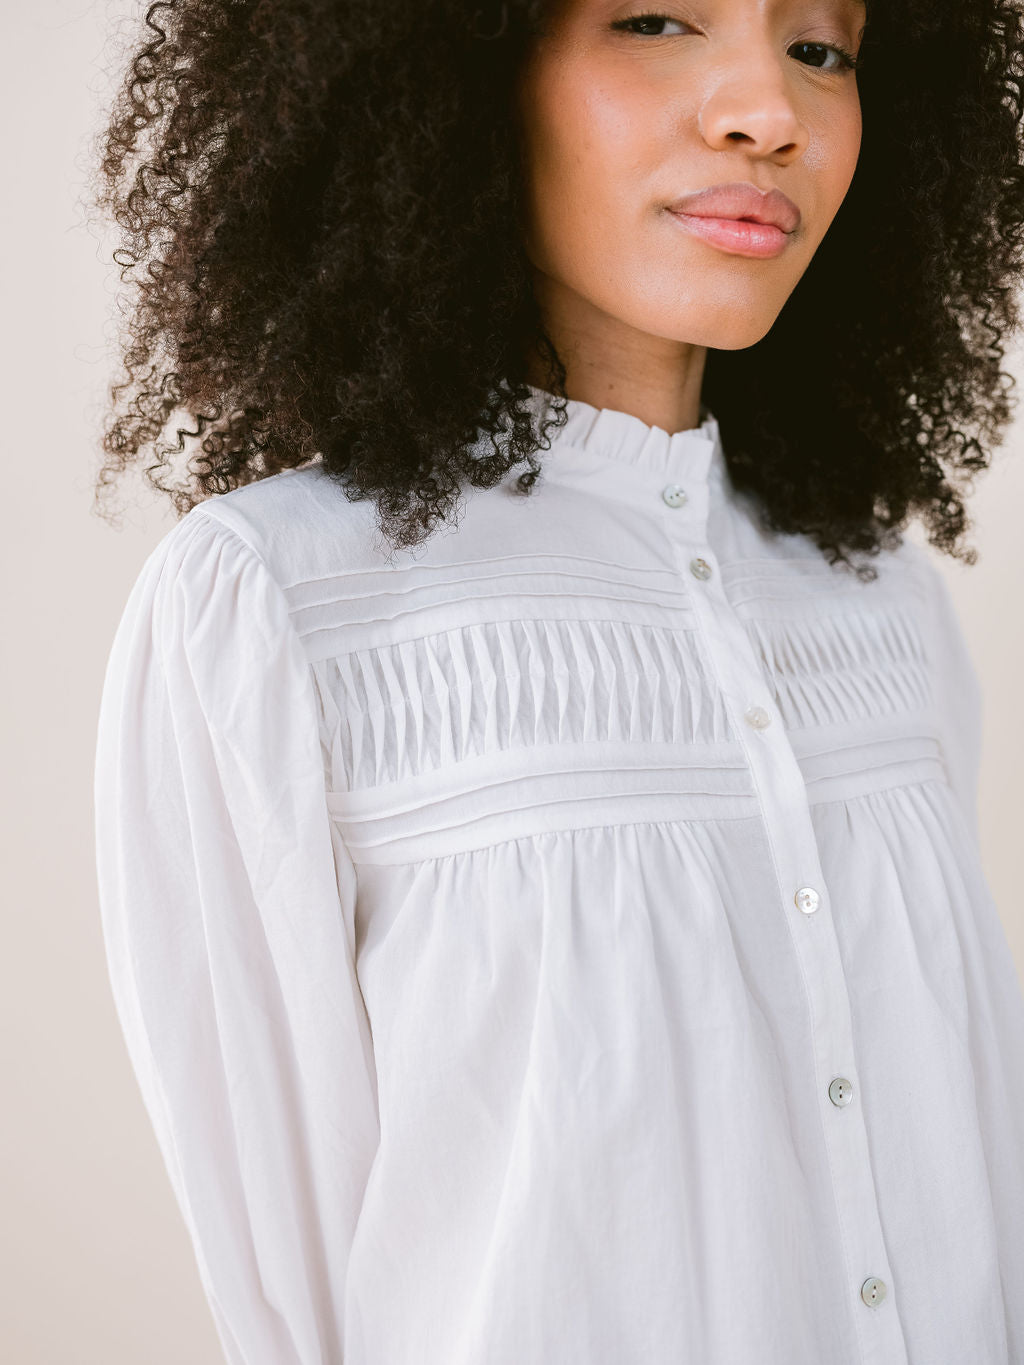 L'agence Lindy Eyelet Blouse in White